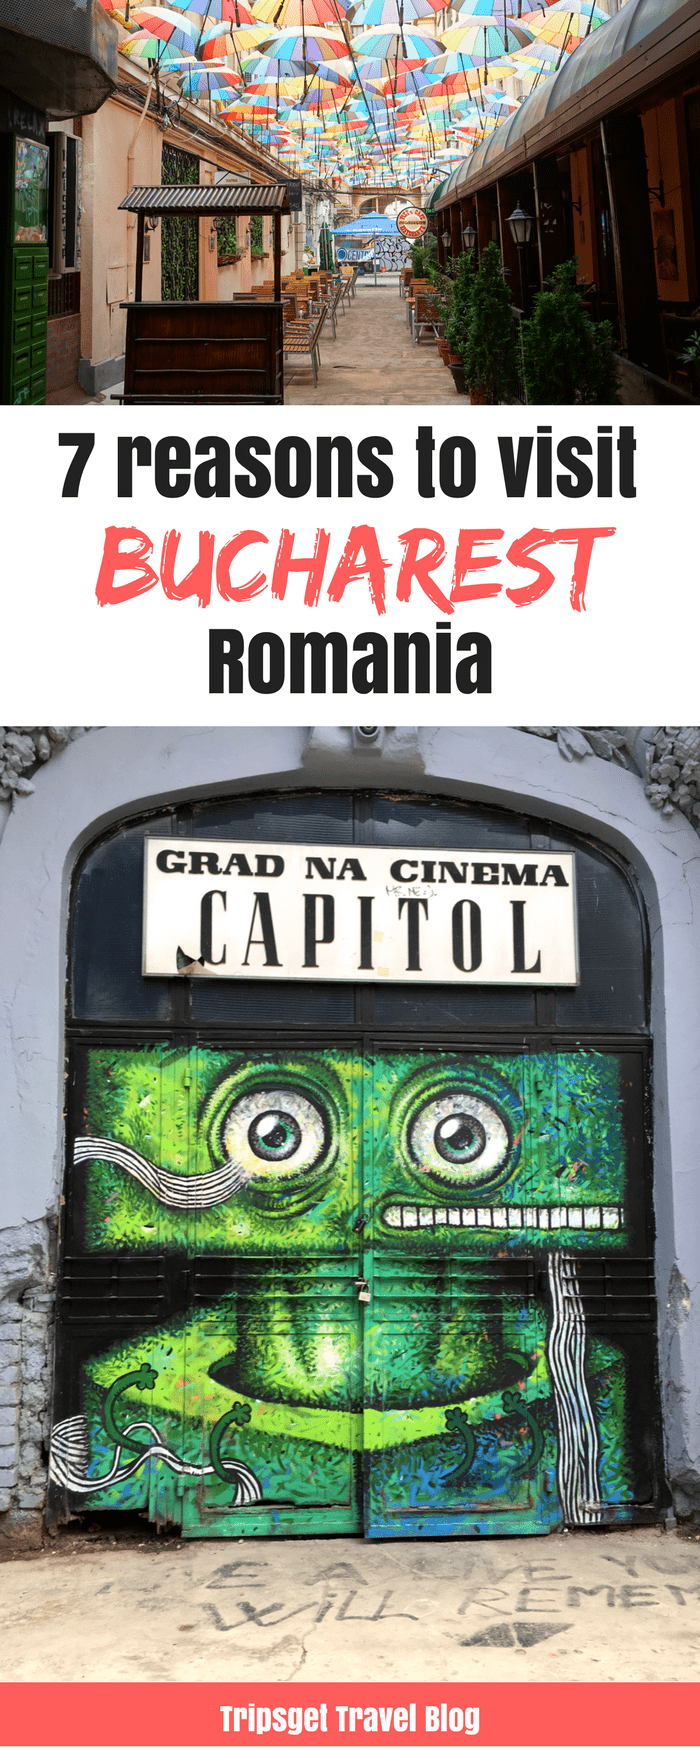 7 Reasons to visit Bucharest, the capital of Romania right now